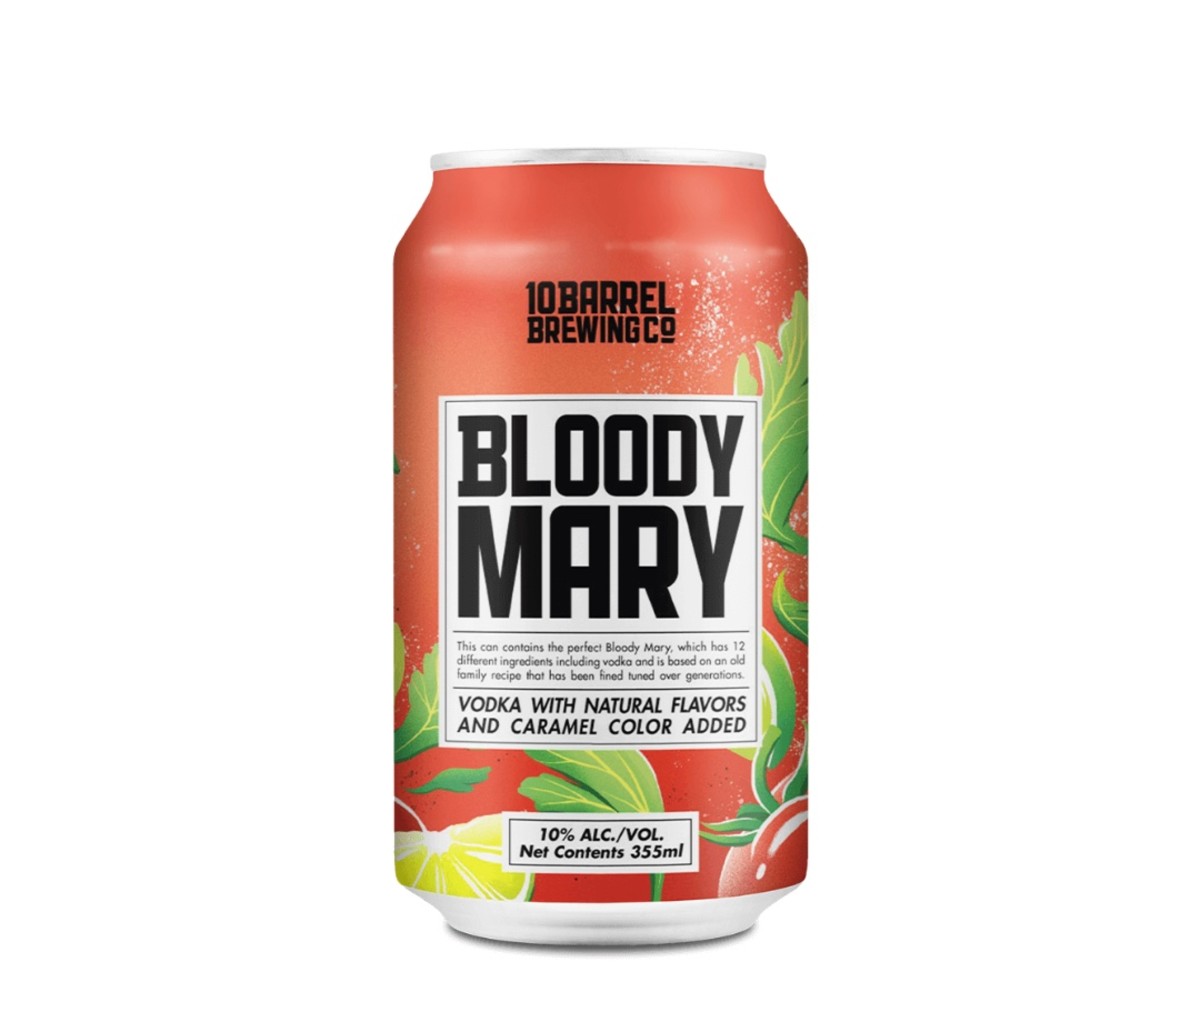 10 Barrel's Bloody Mary is one of the summer's best canned cocktails.